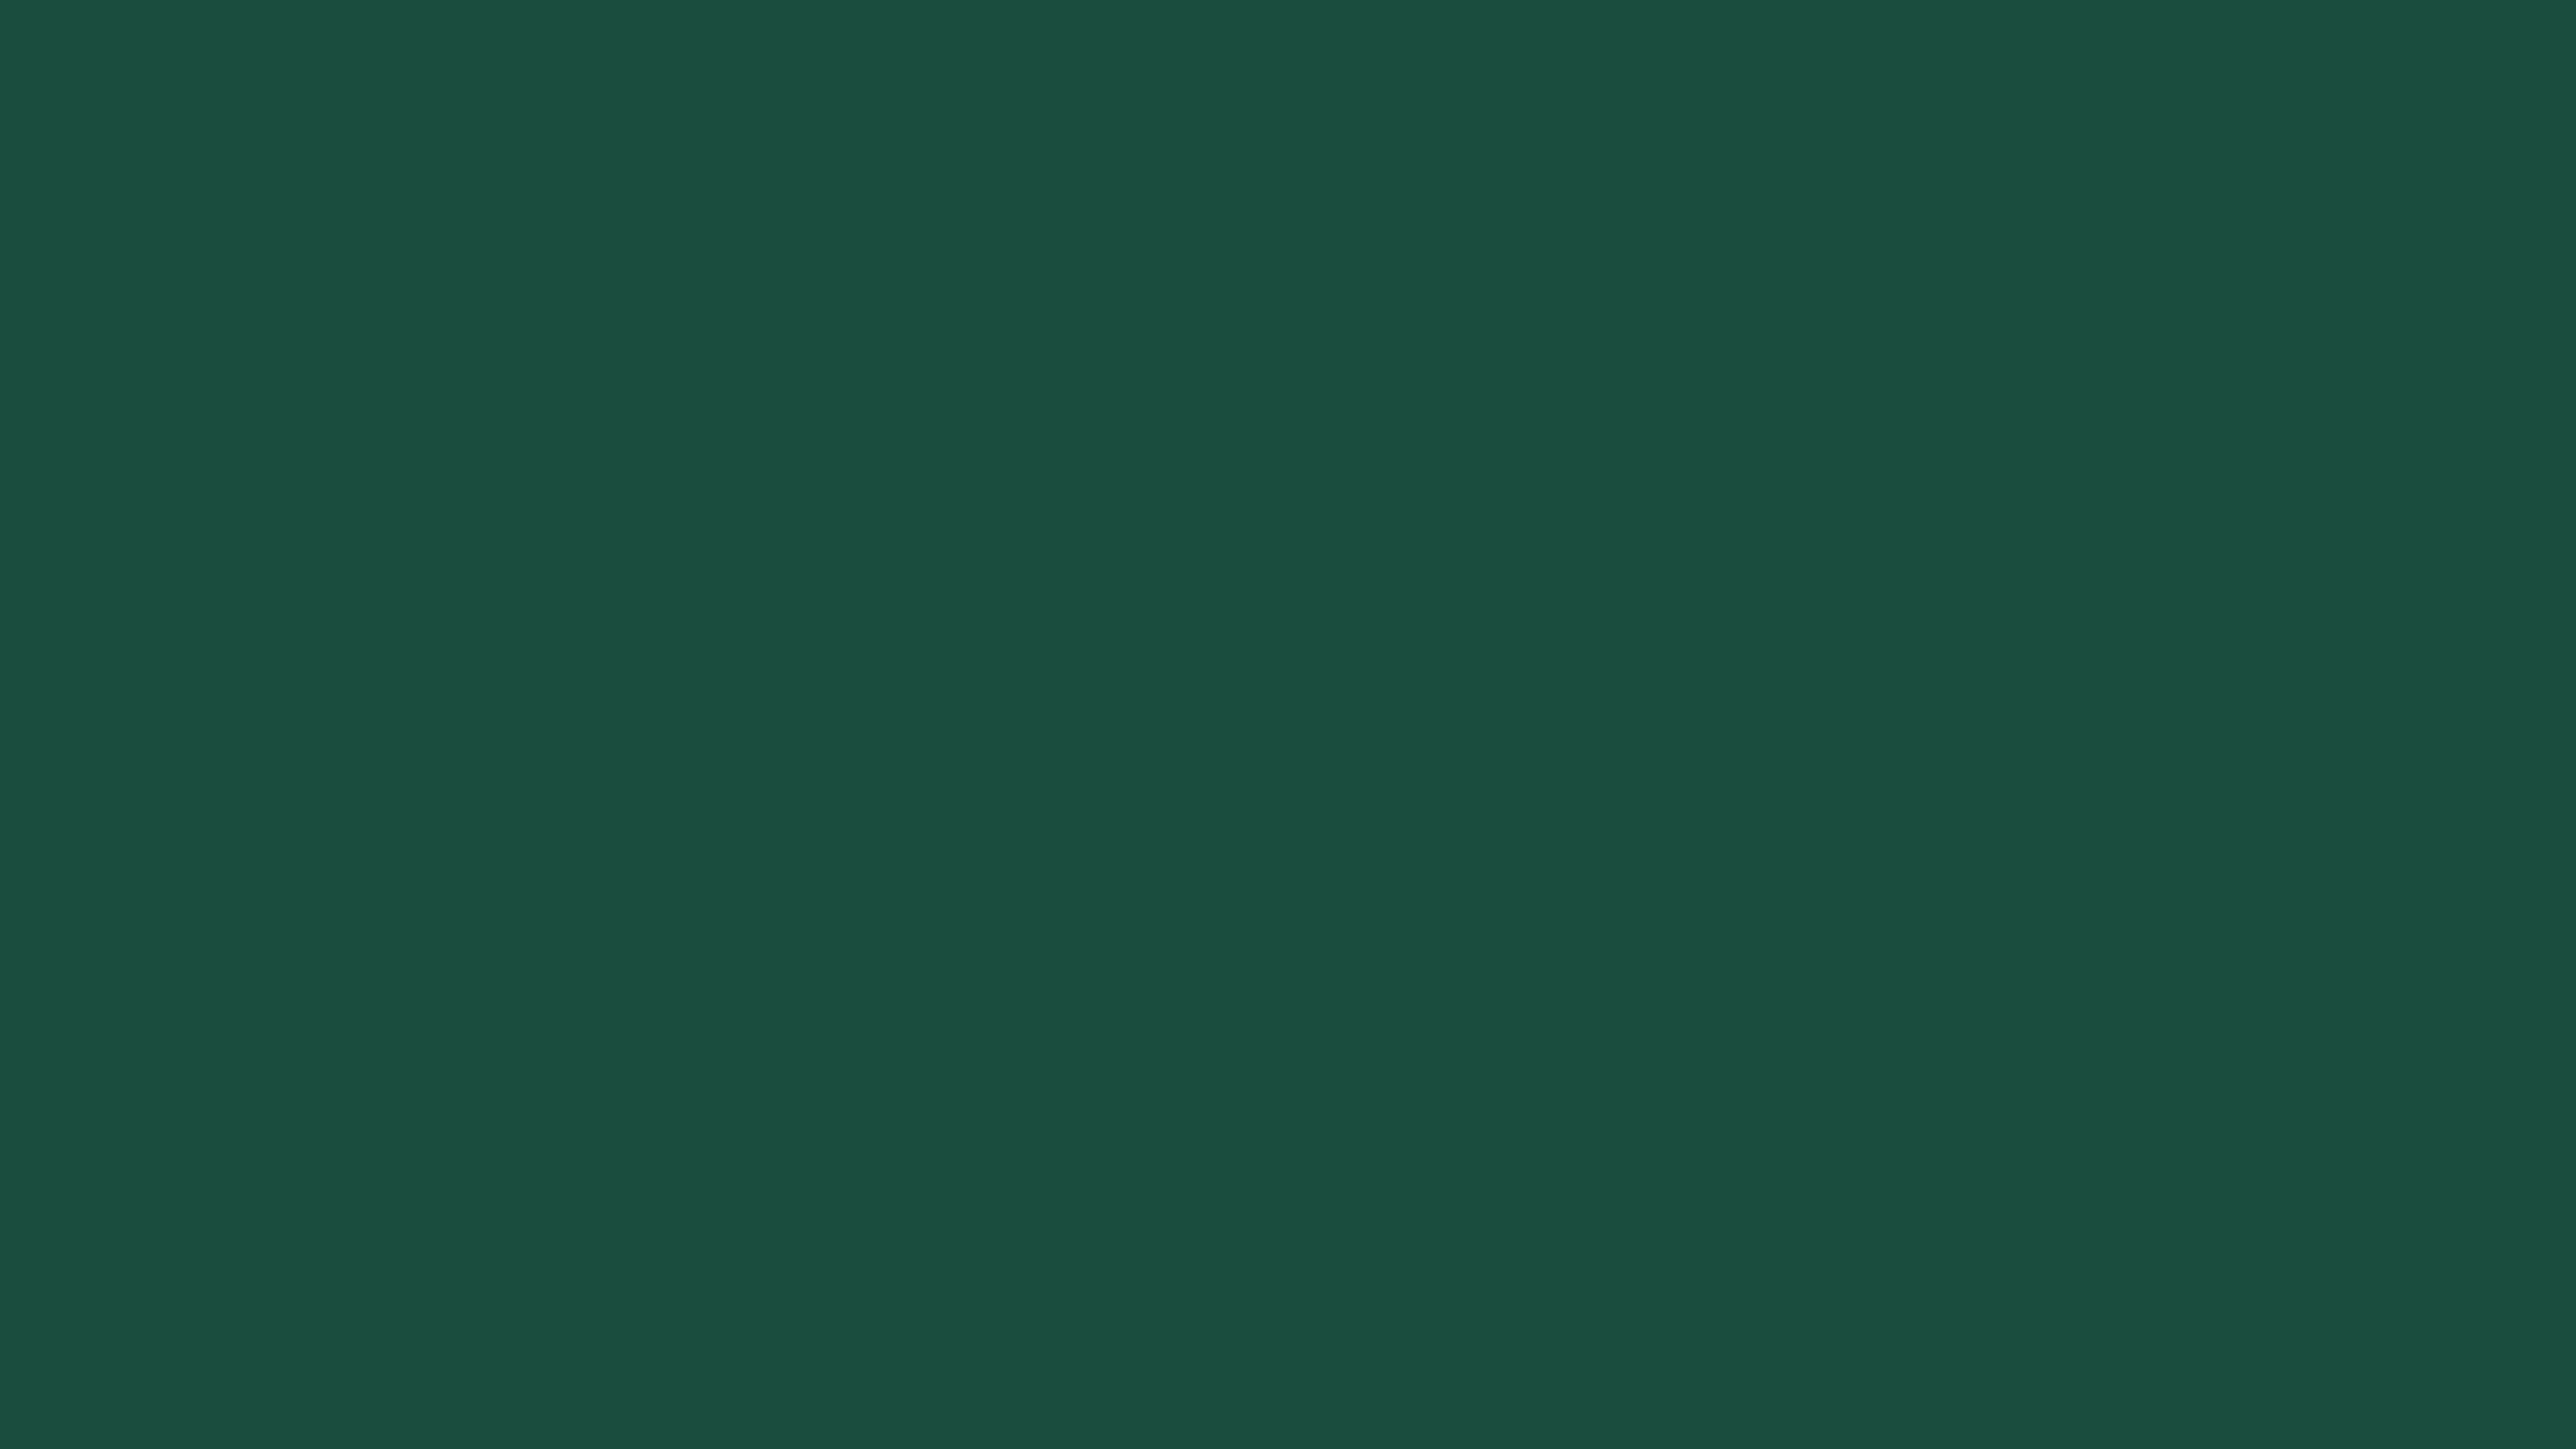 5120x2880 English Green Solid Color Background